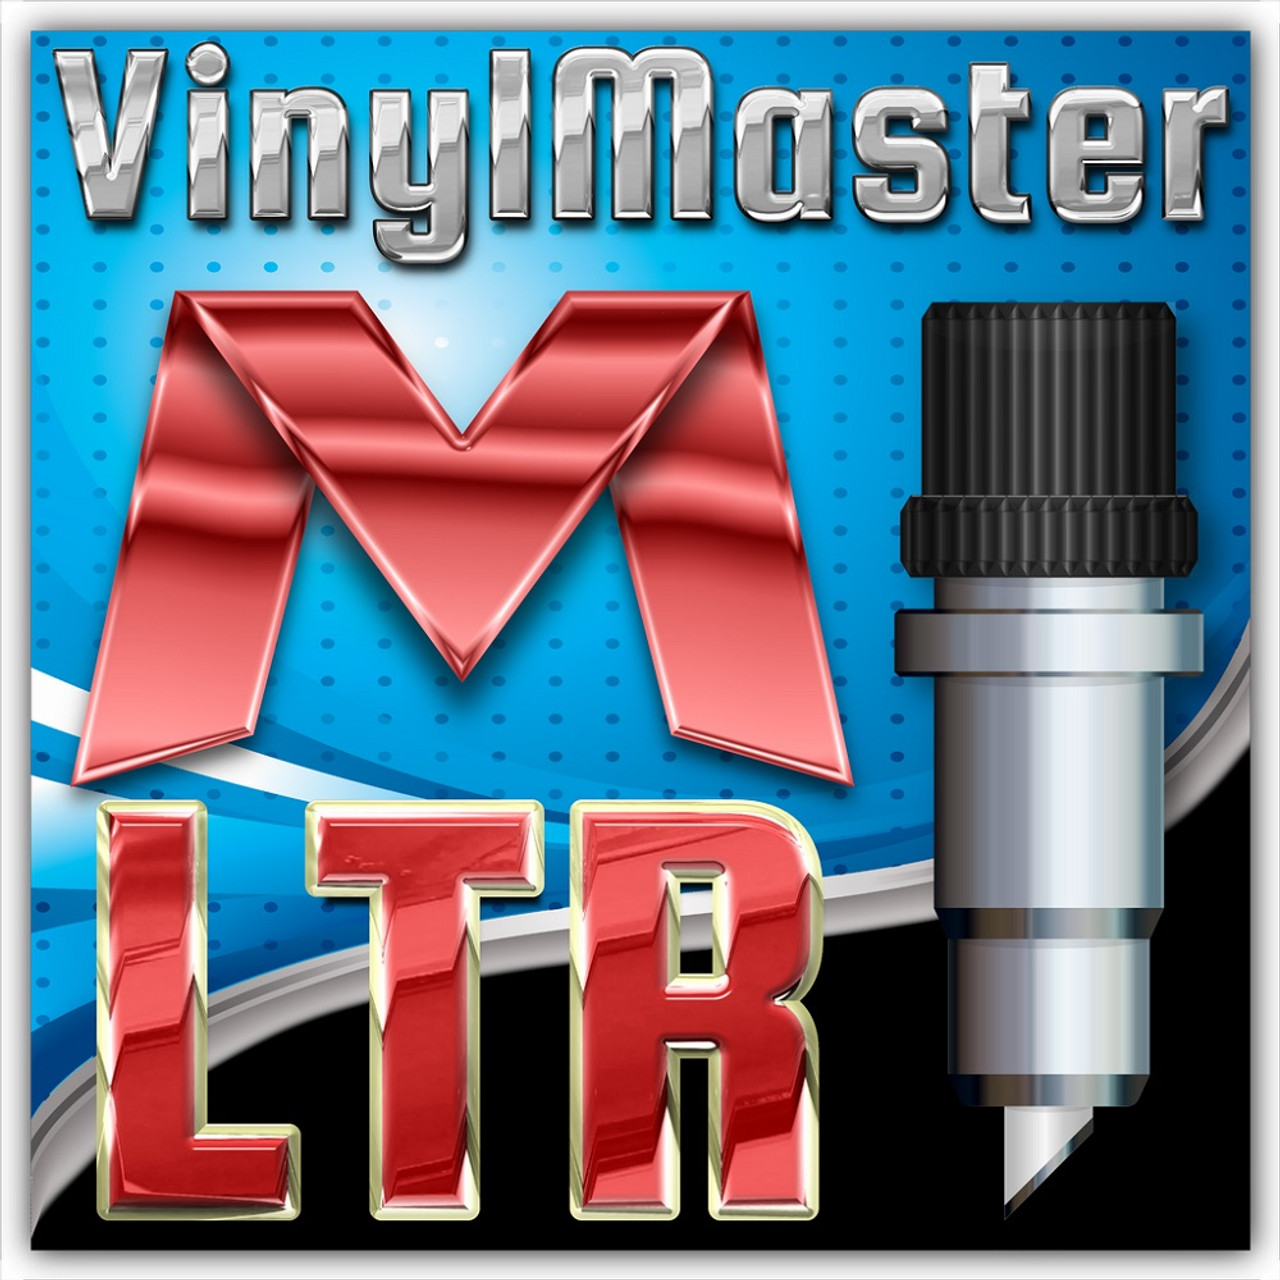 Details about   Vinyl Cutting Software for Sign Cutters VinylMaster letters v4 show original title 